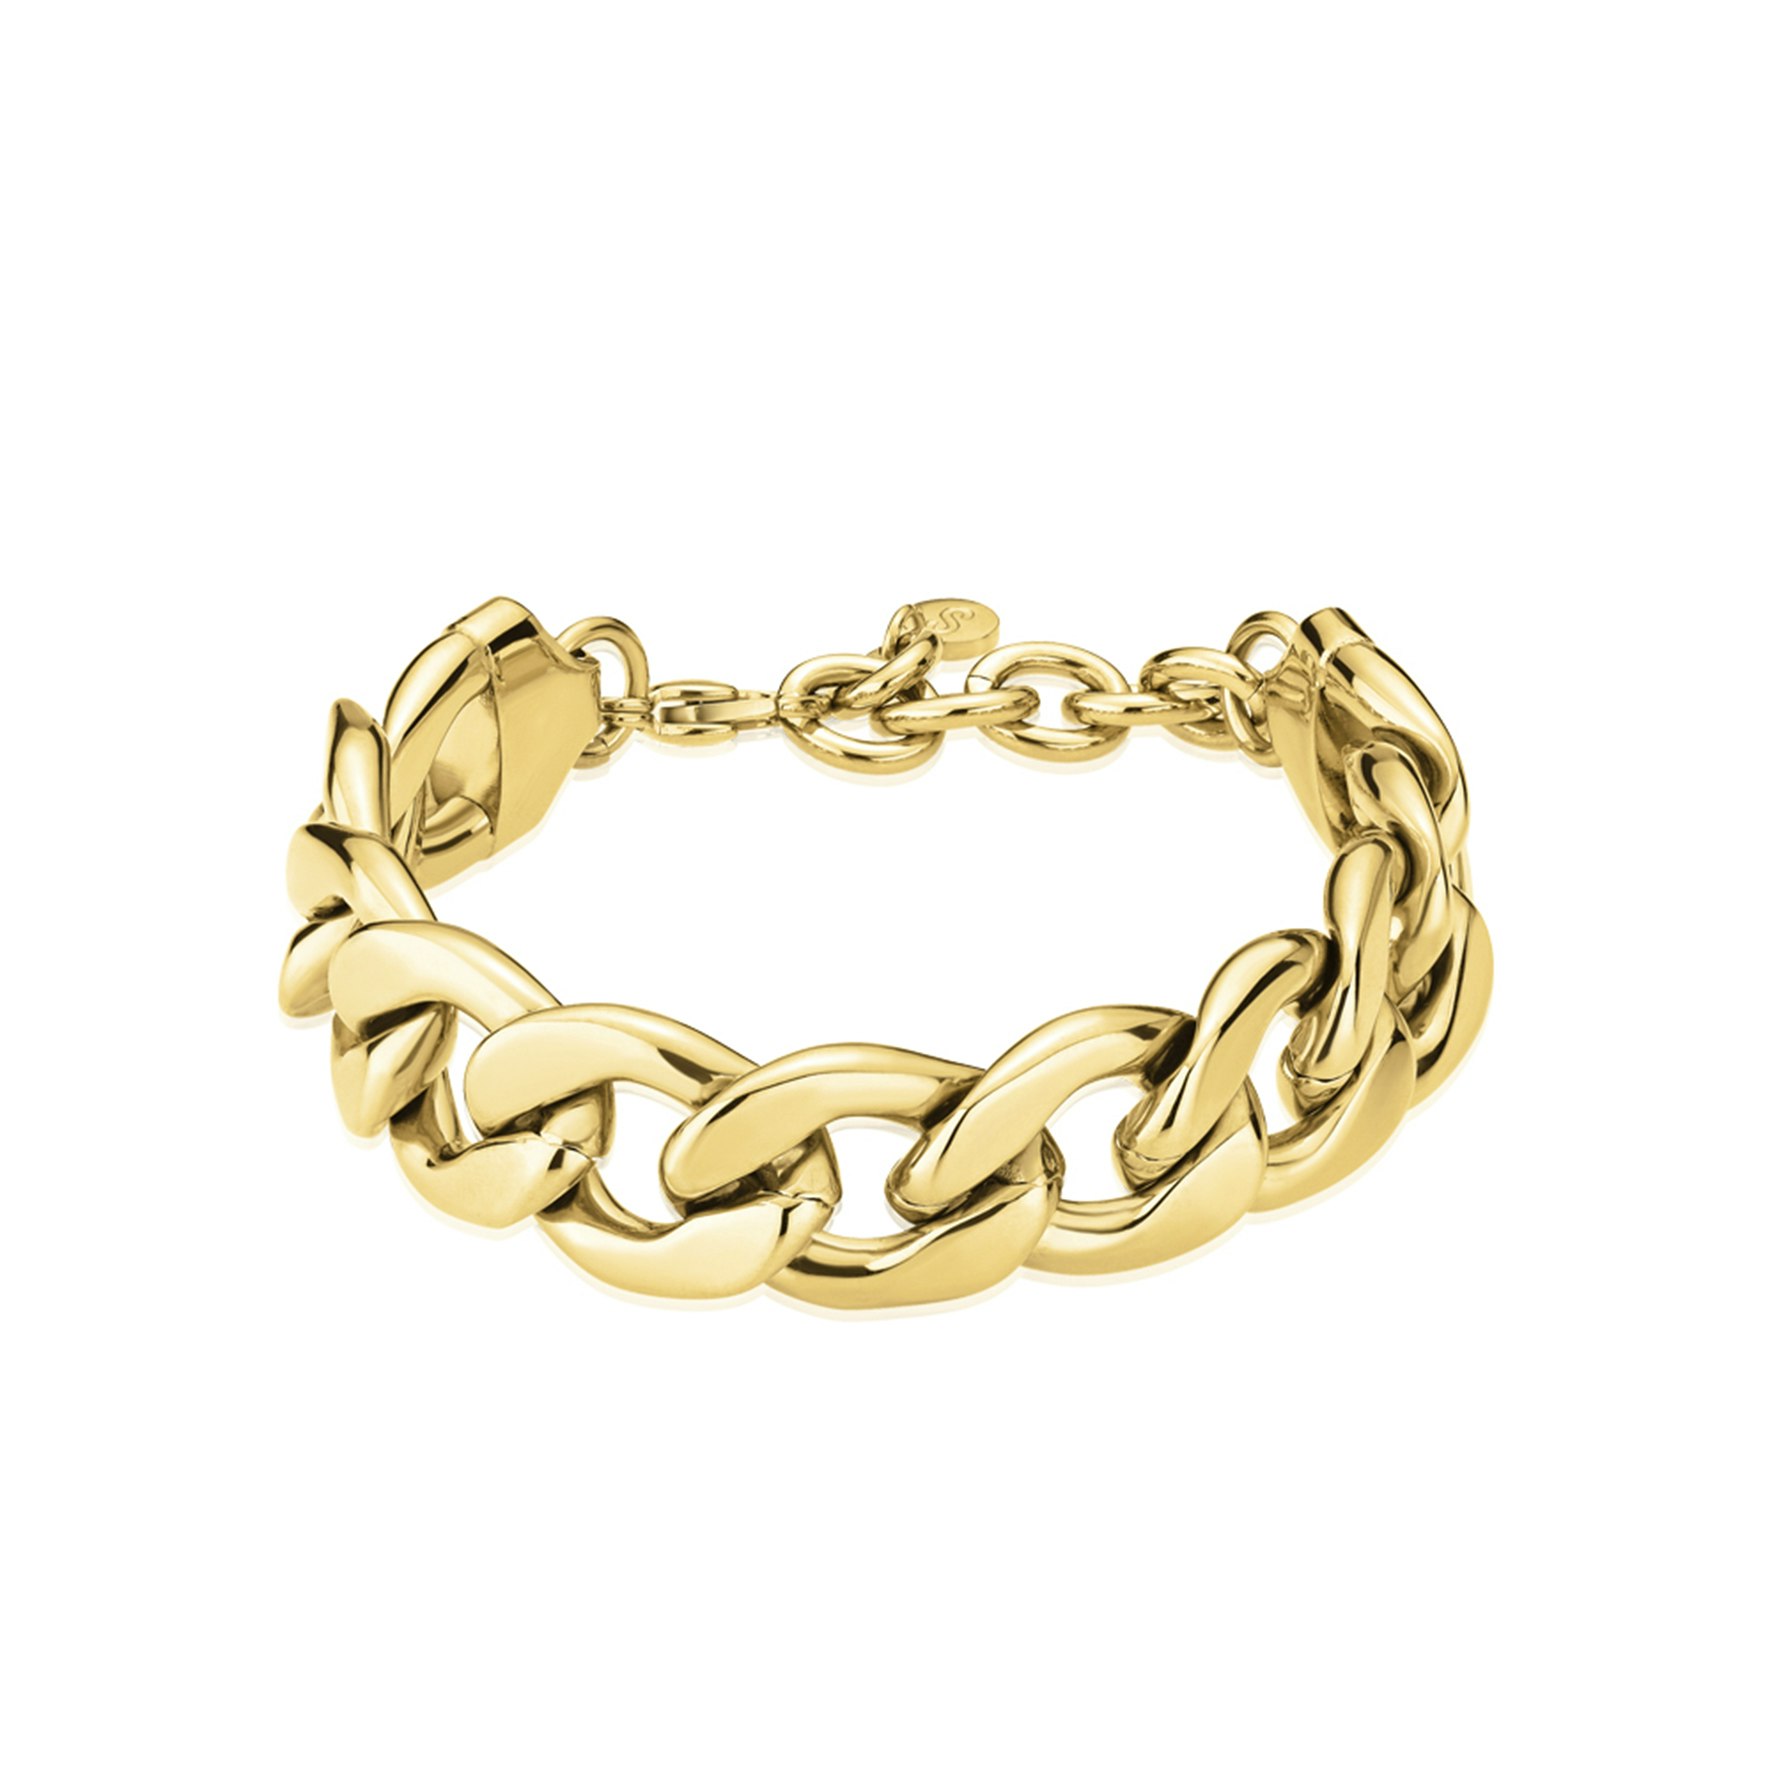 Panzer Chunky Bracelet from Sistie 2nd in Goldplated stainless steel